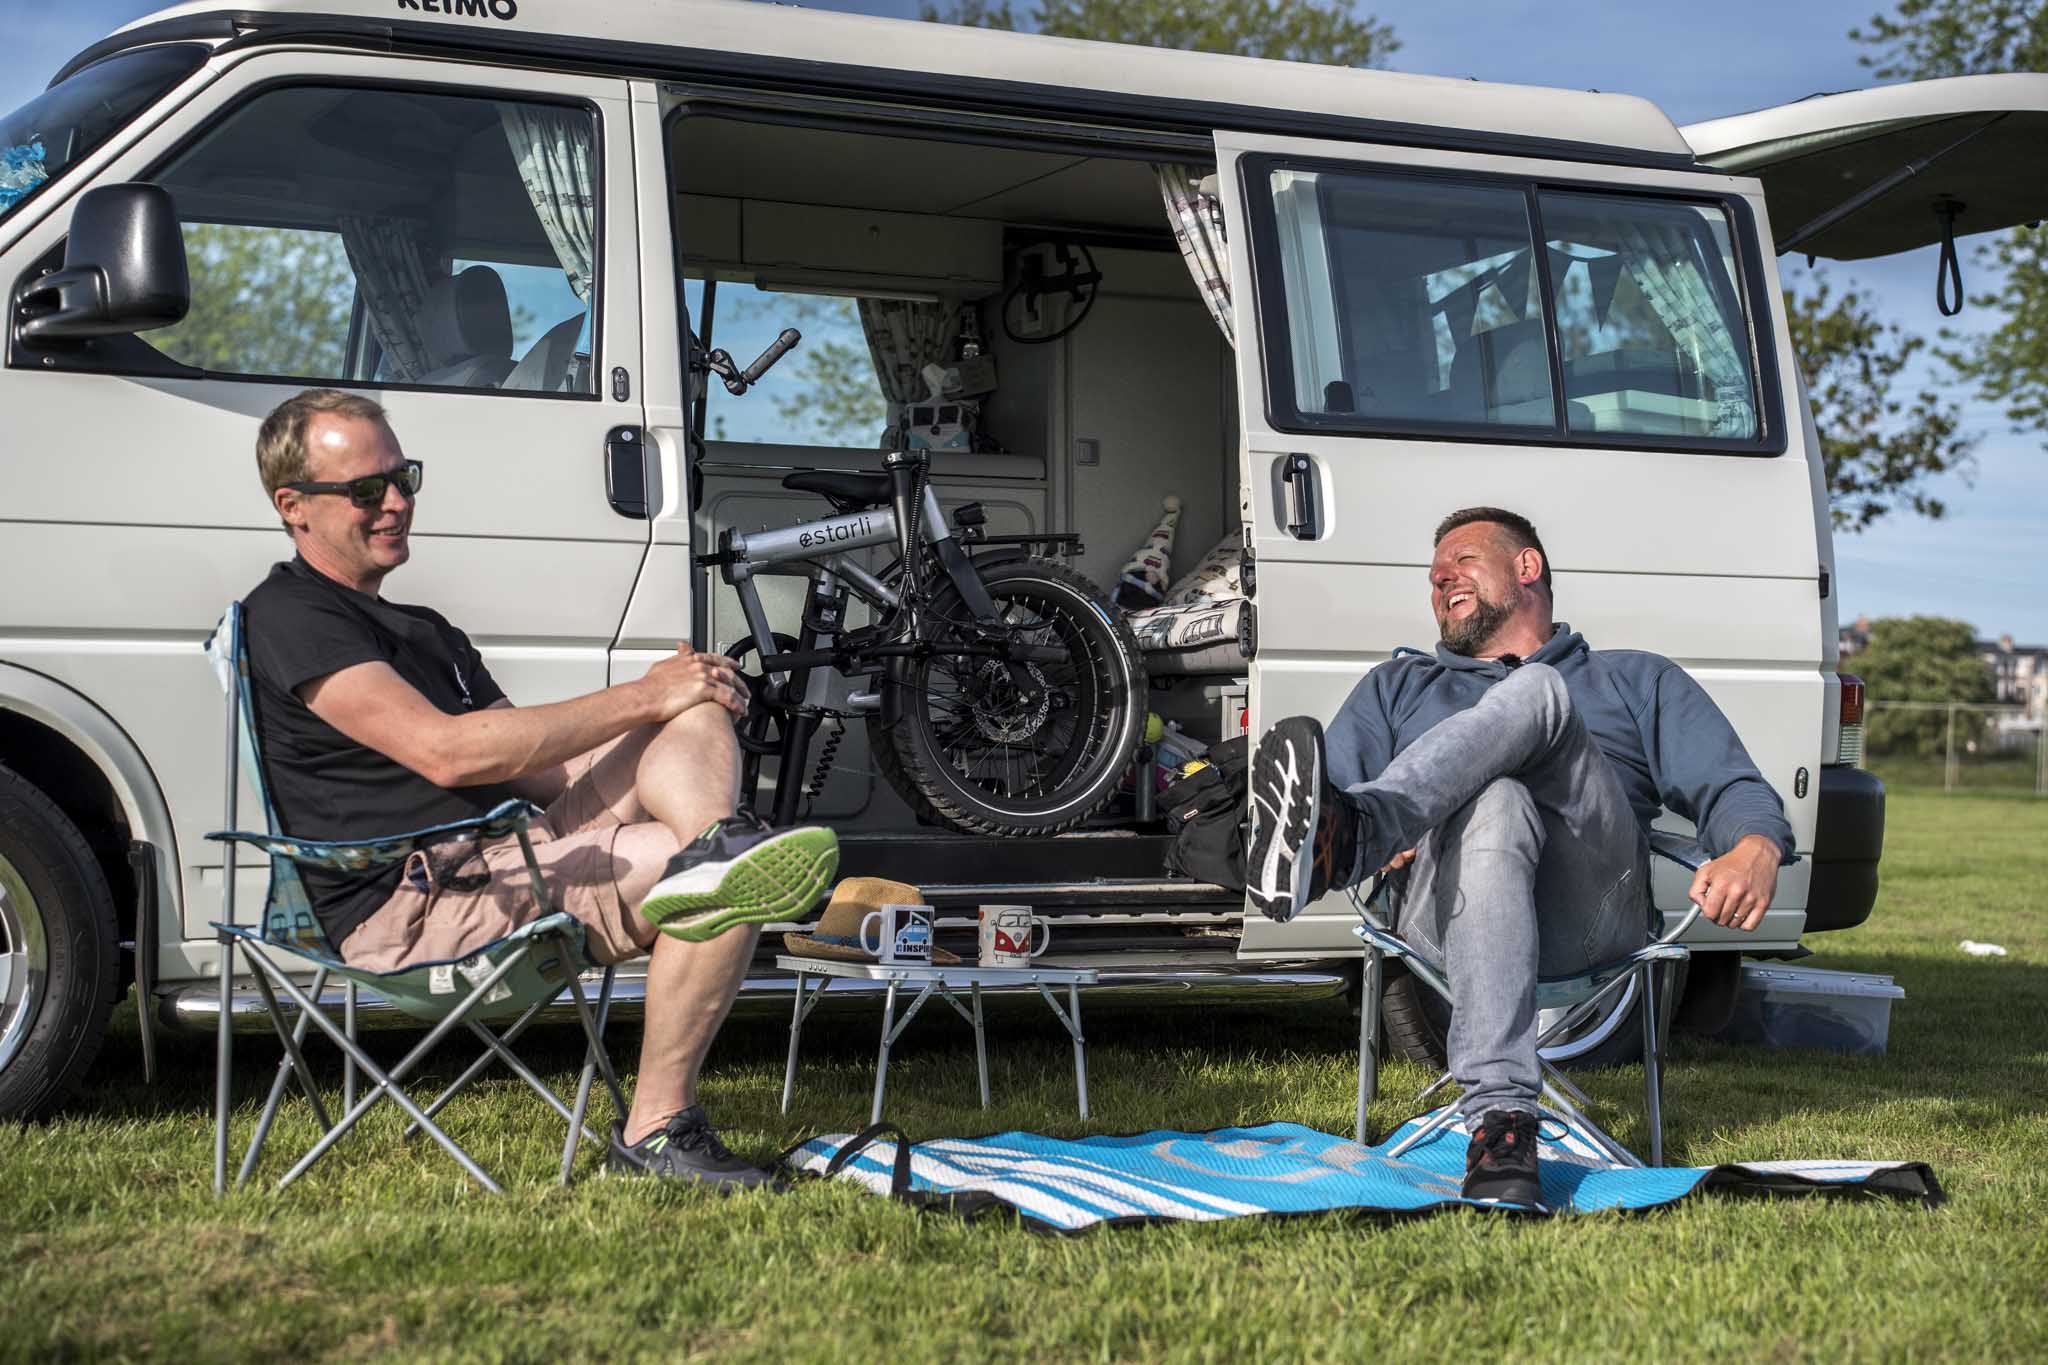 The Estarli e20.8 gives campers all the freedom and convenience they crave